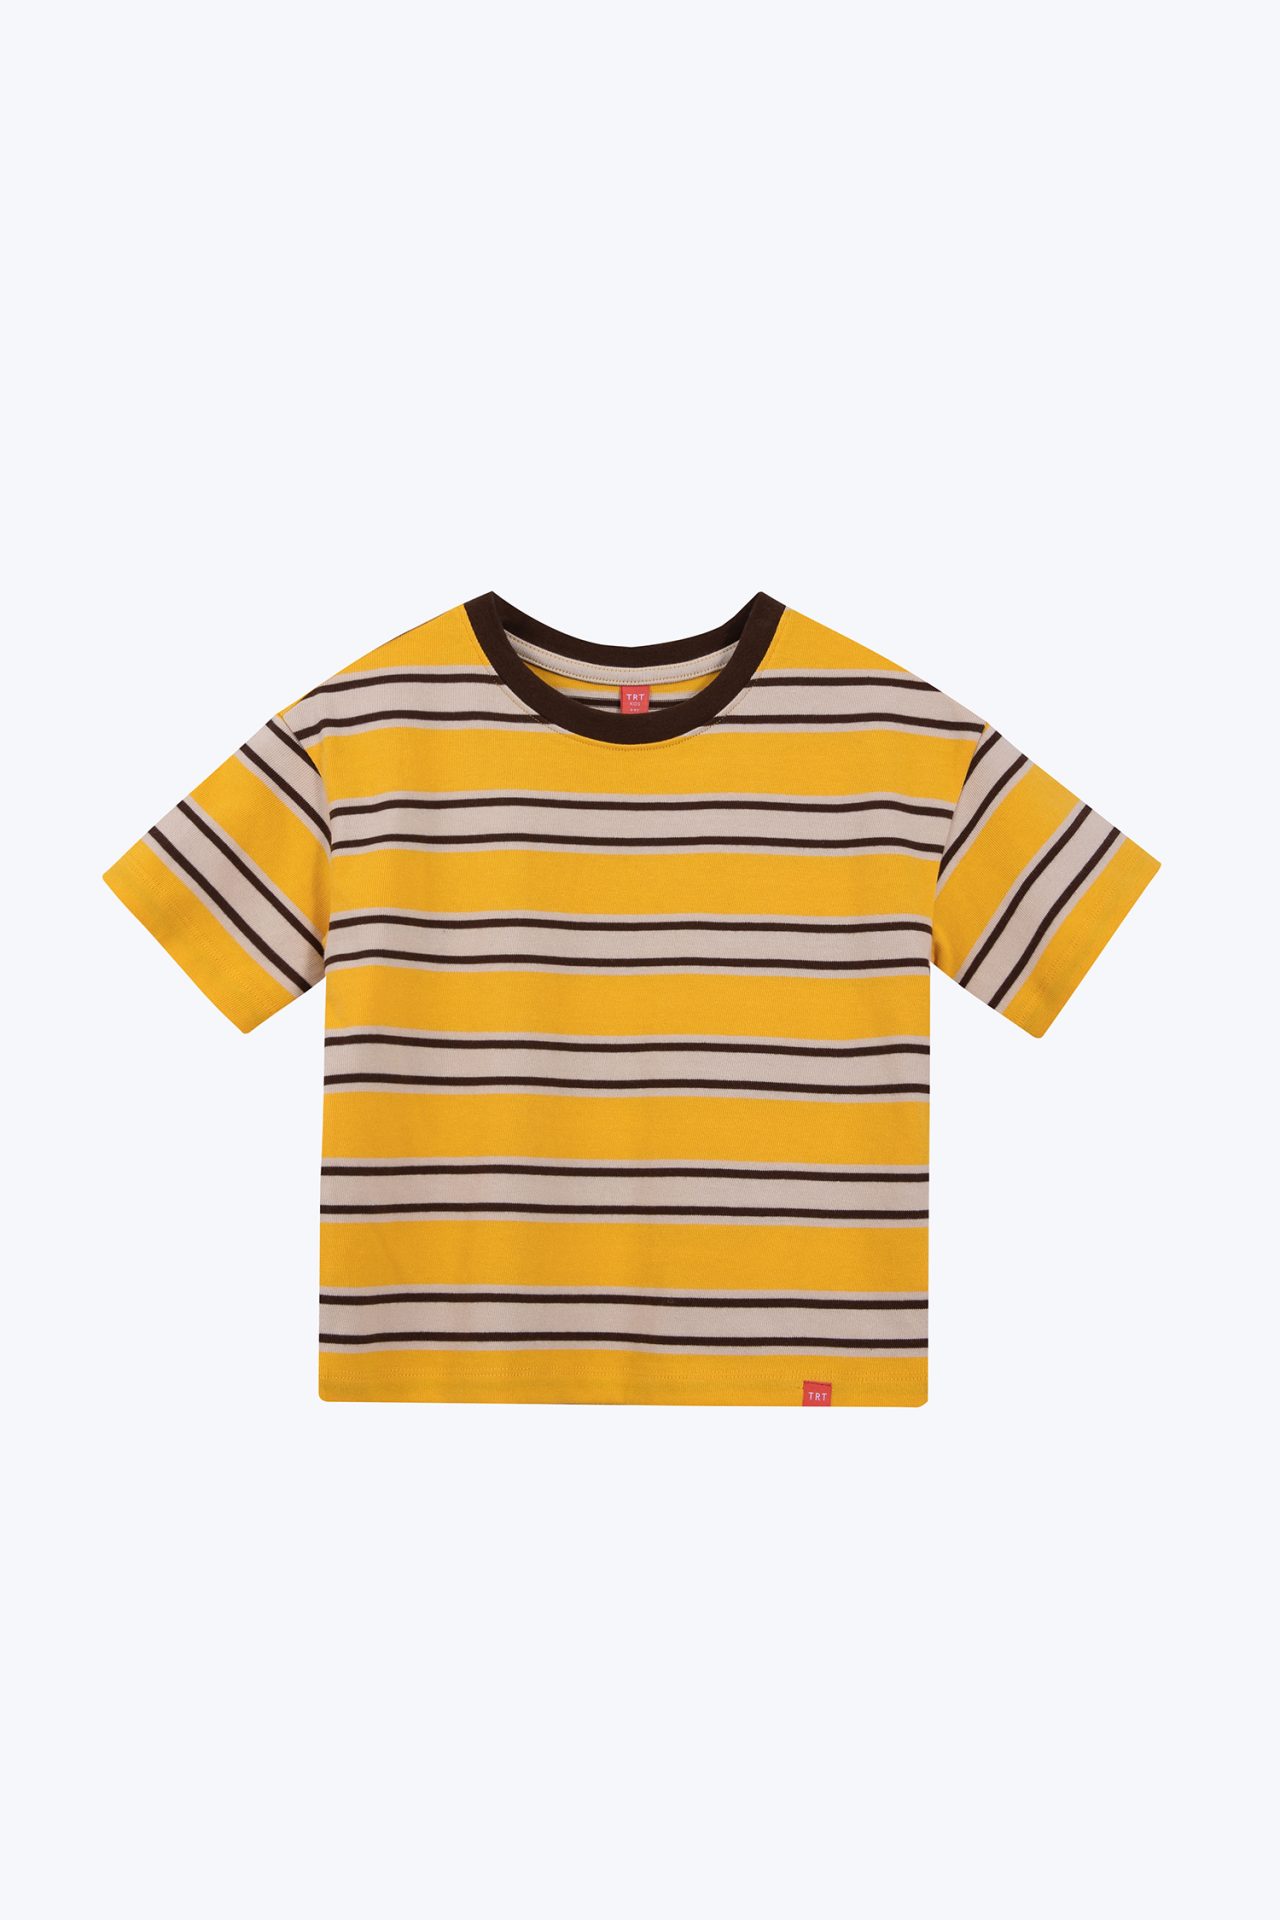 KT800049D Jersey Multi colour Wide Striped Tee YELLOW STRPPES